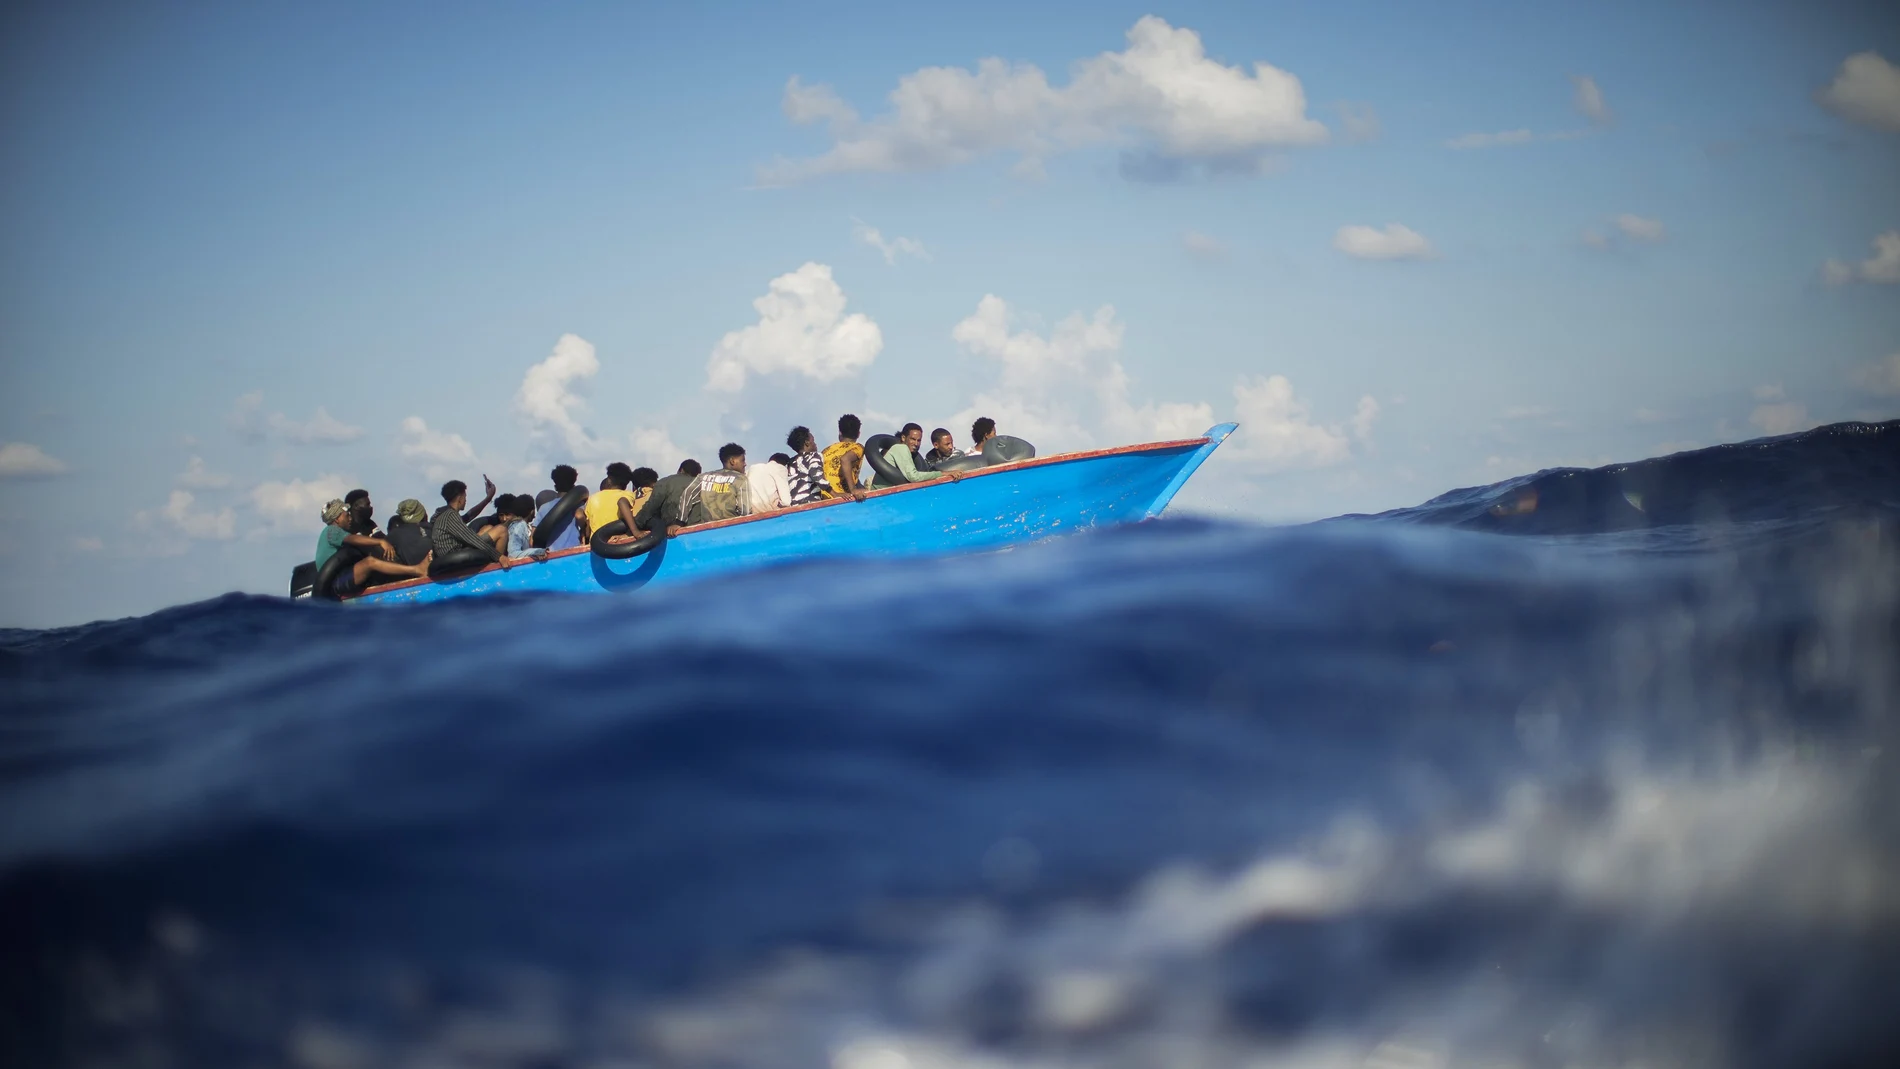 FILE - Migrants sail a wooden boat at south of the Italian Lampedusa island at the Mediterranean sea, Aug. 11, 2022. The back-to-back shipwrecks of migrant boats off Greece that left at least 22 people dead this week has once again put the spotlight on the dangers of the Mediterranean migration route to Europe. (AP Photo/Francisco Seco, file)